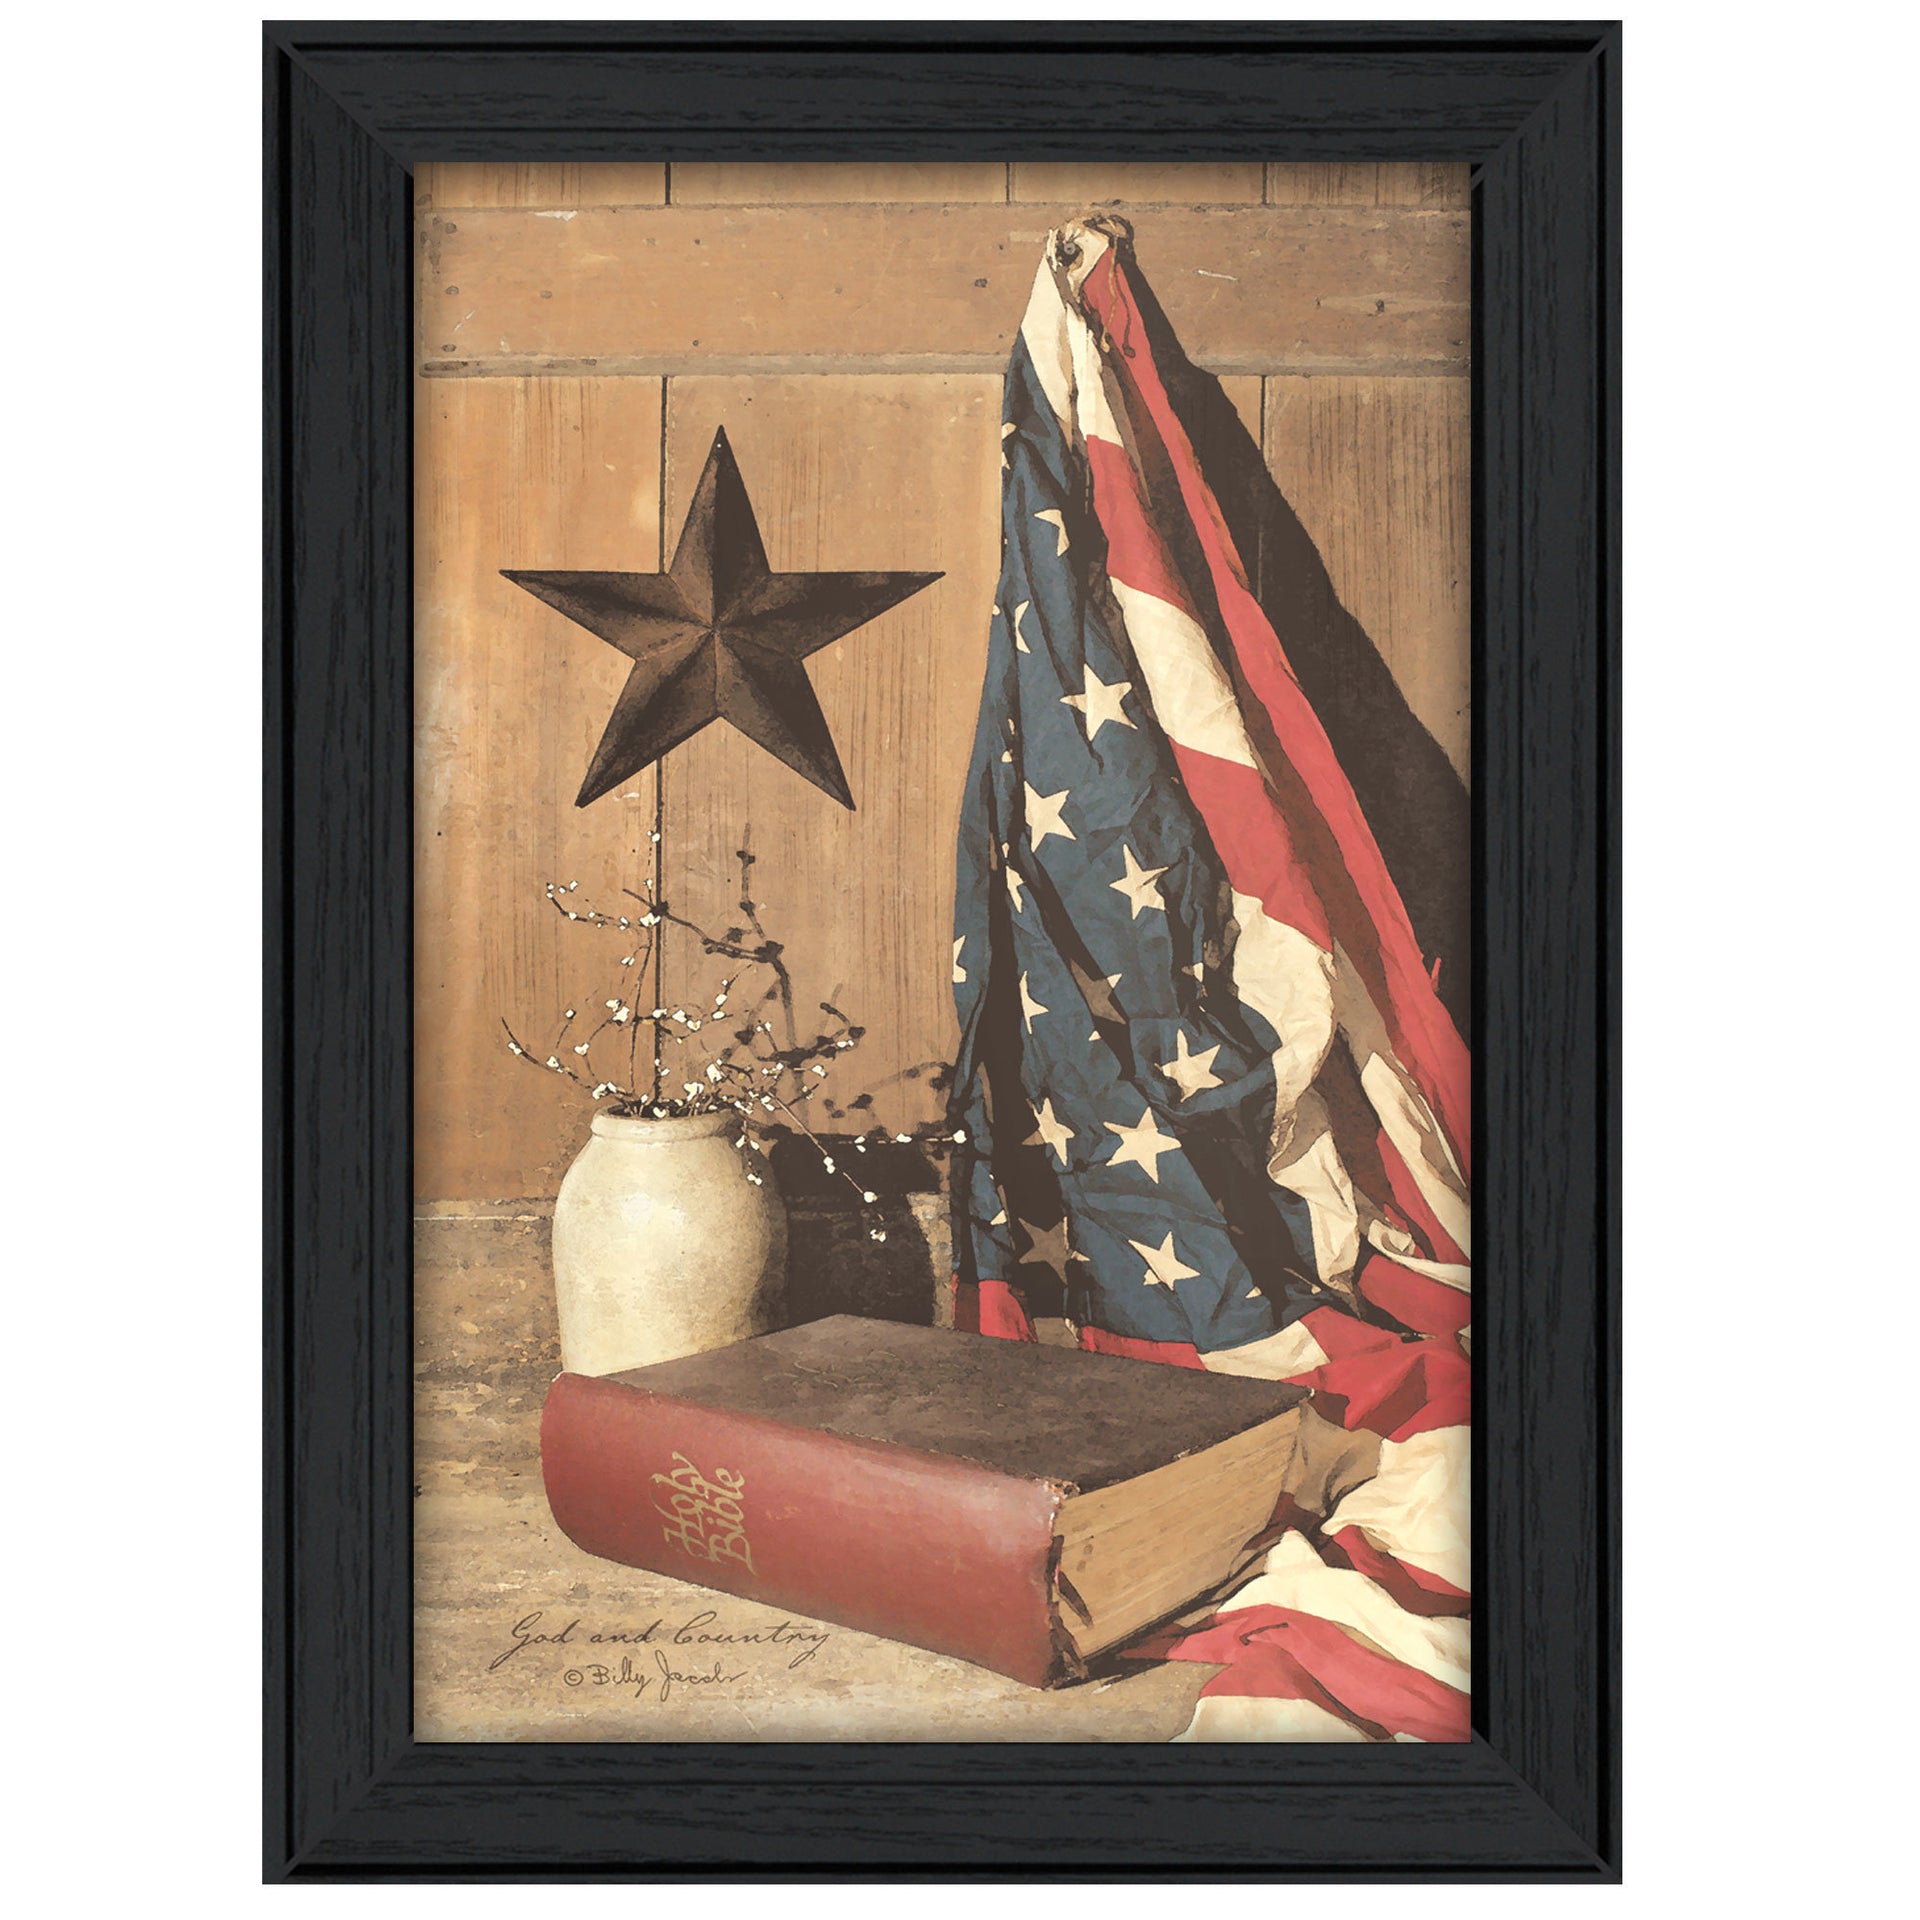 "God and Country" By Billy Jacobs, Printed Wall Art, Black Frame